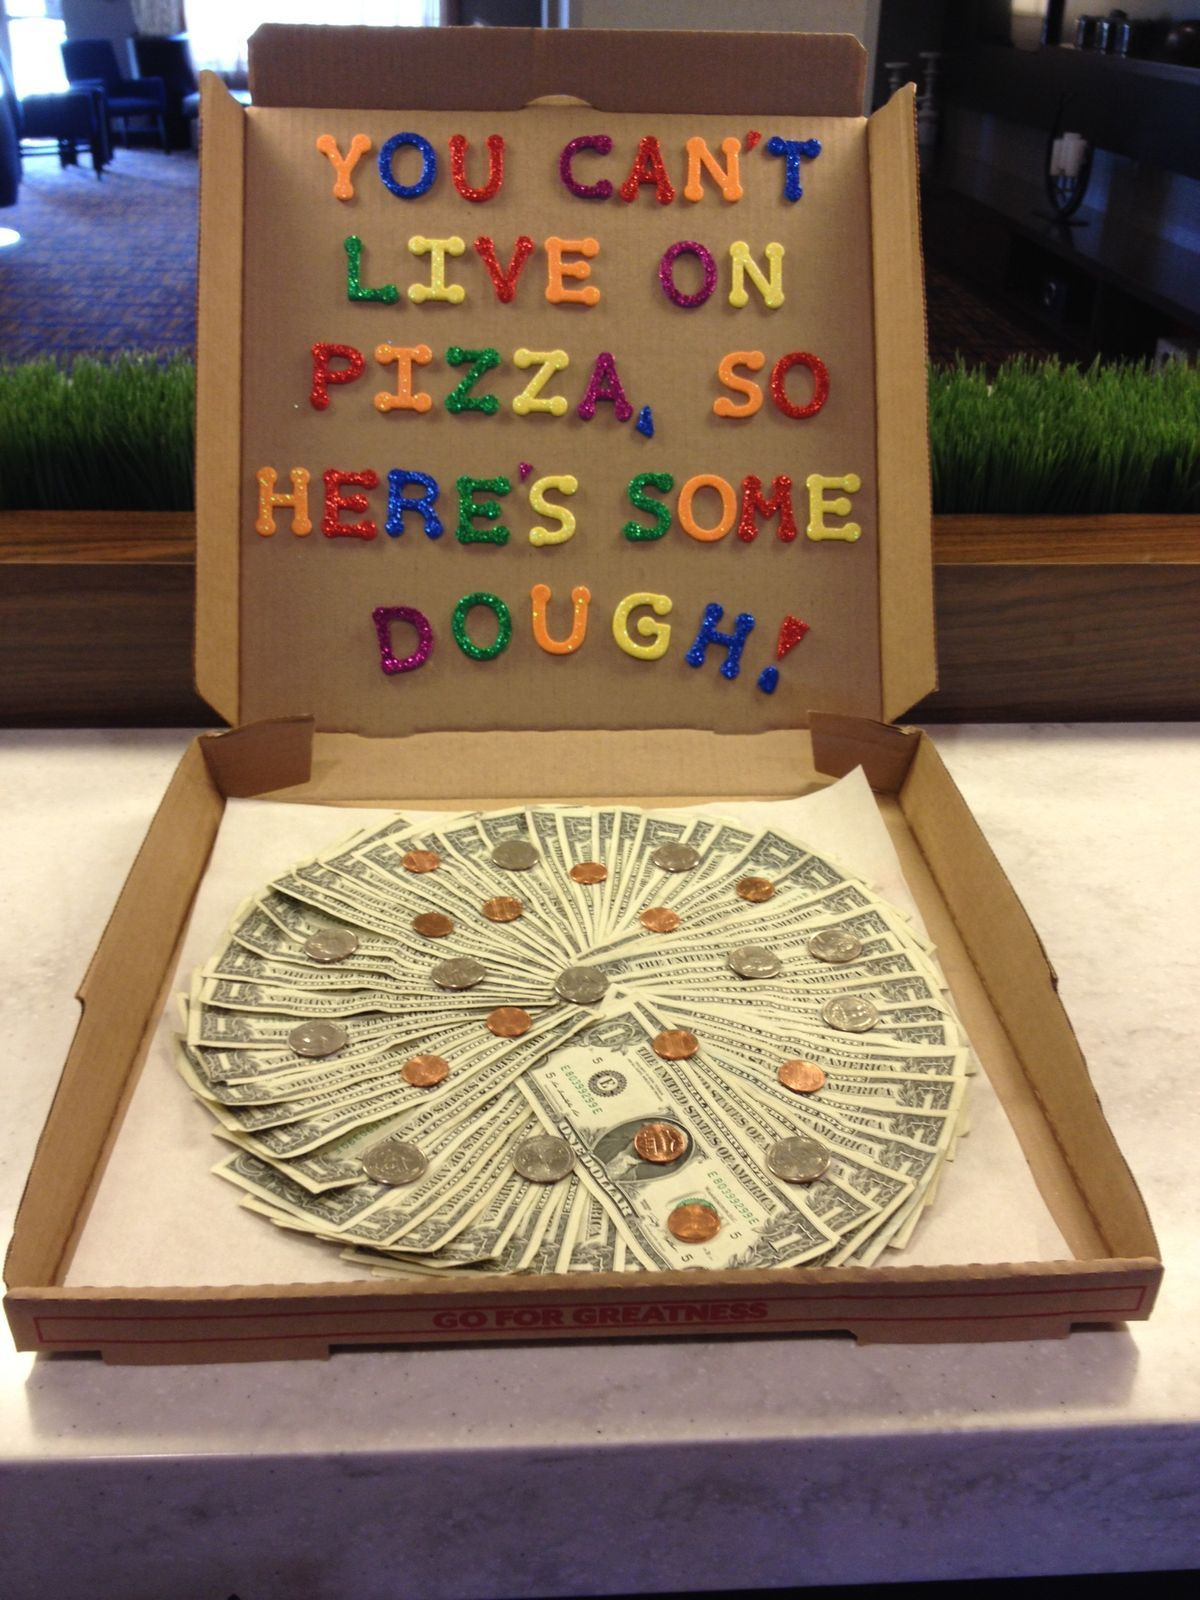 Great Gift Ideas For High School Graduation
 You can t live on pizza so here s some dough fun way